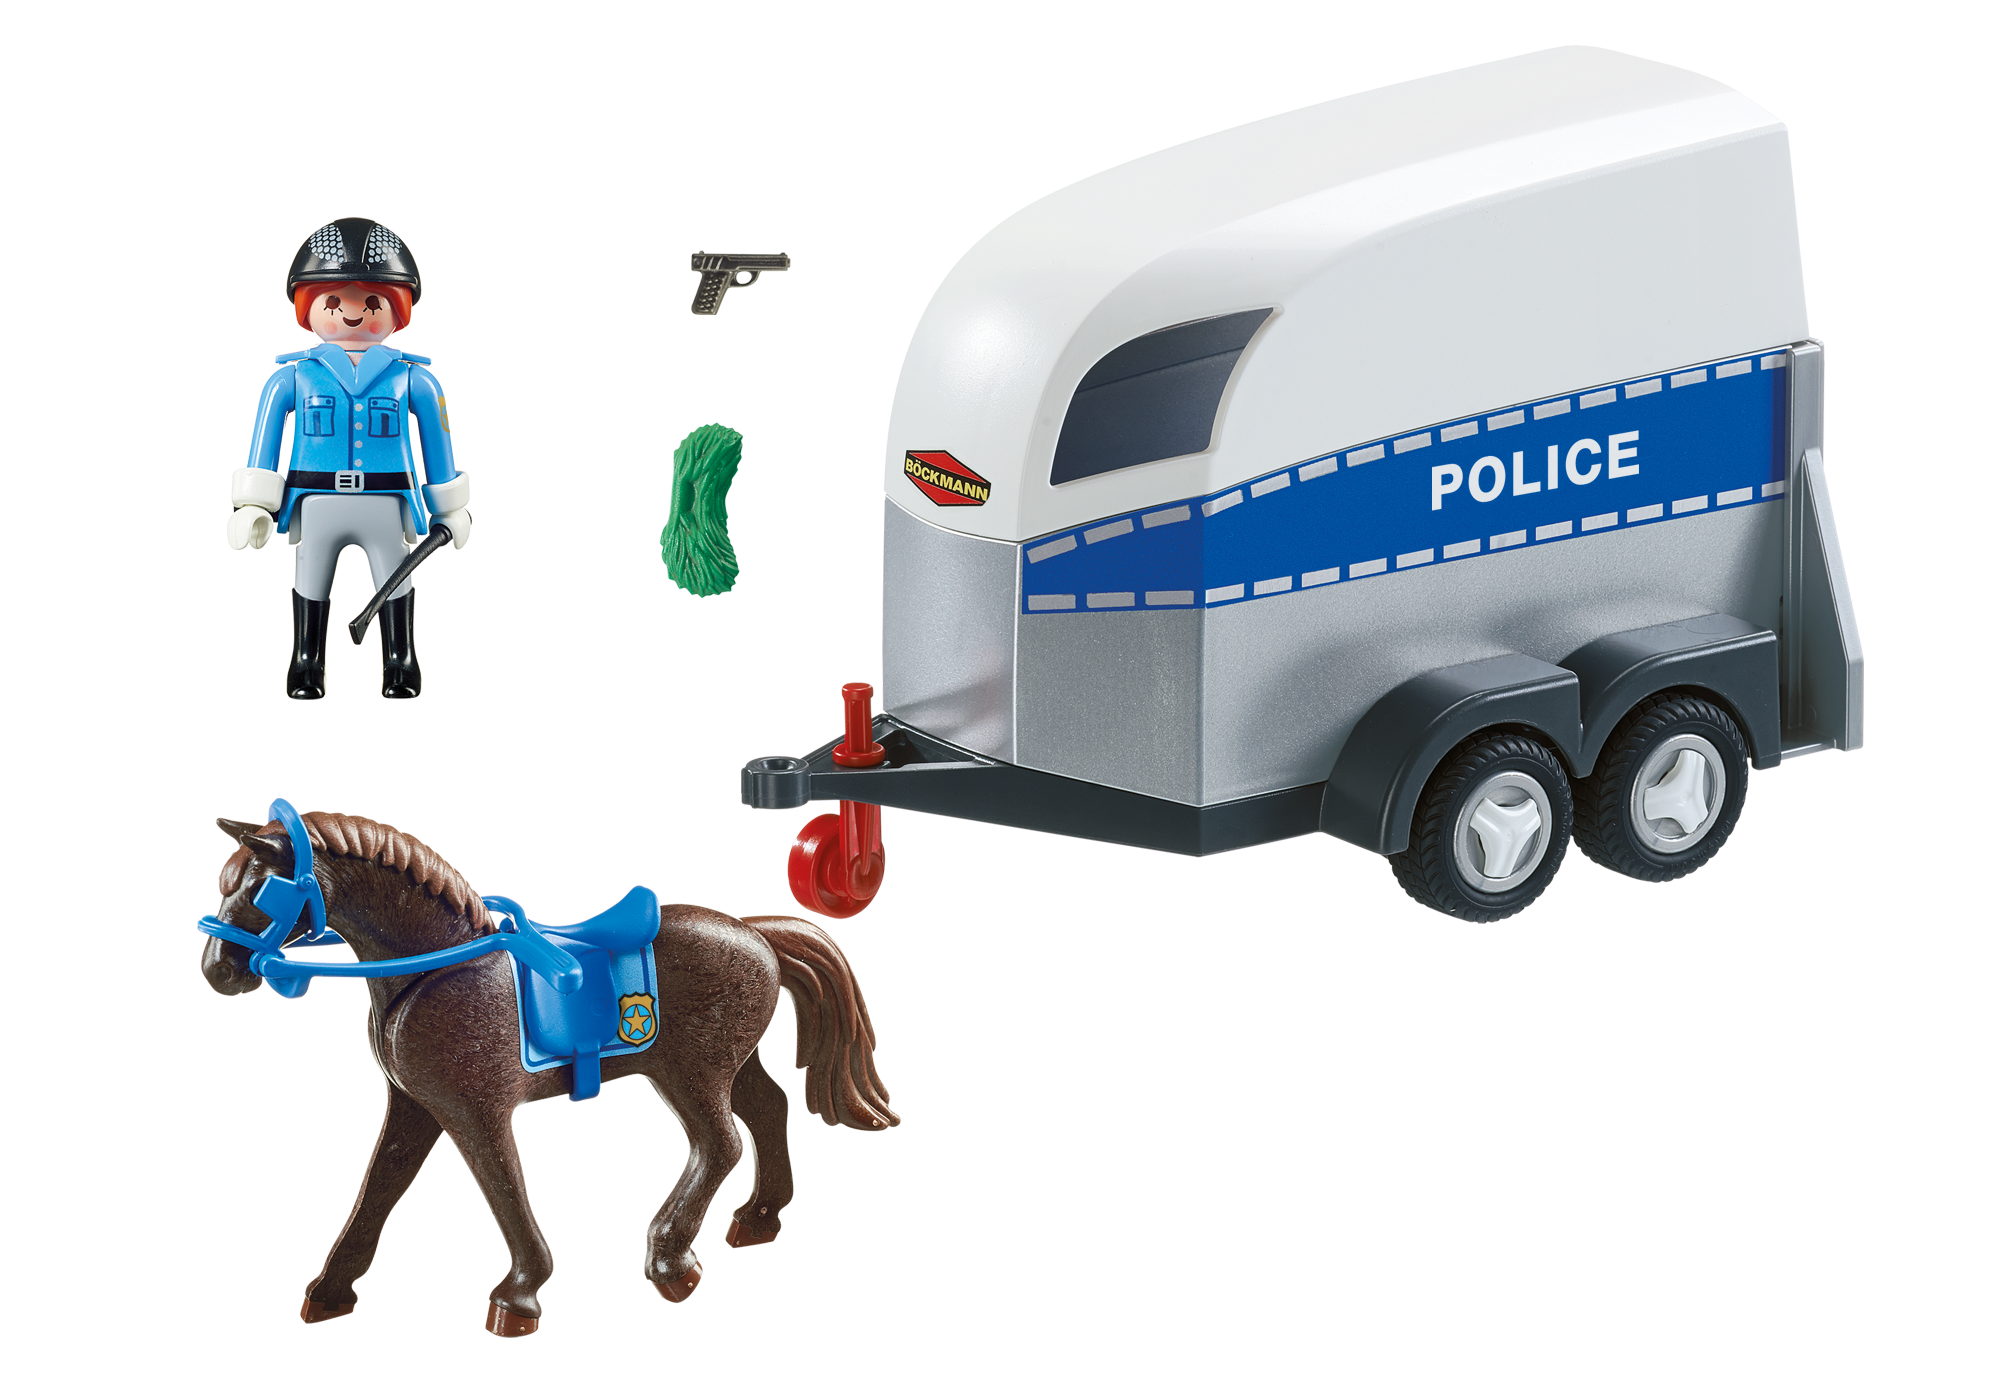  Playmobil Car with Pony Trailer : Toys & Games